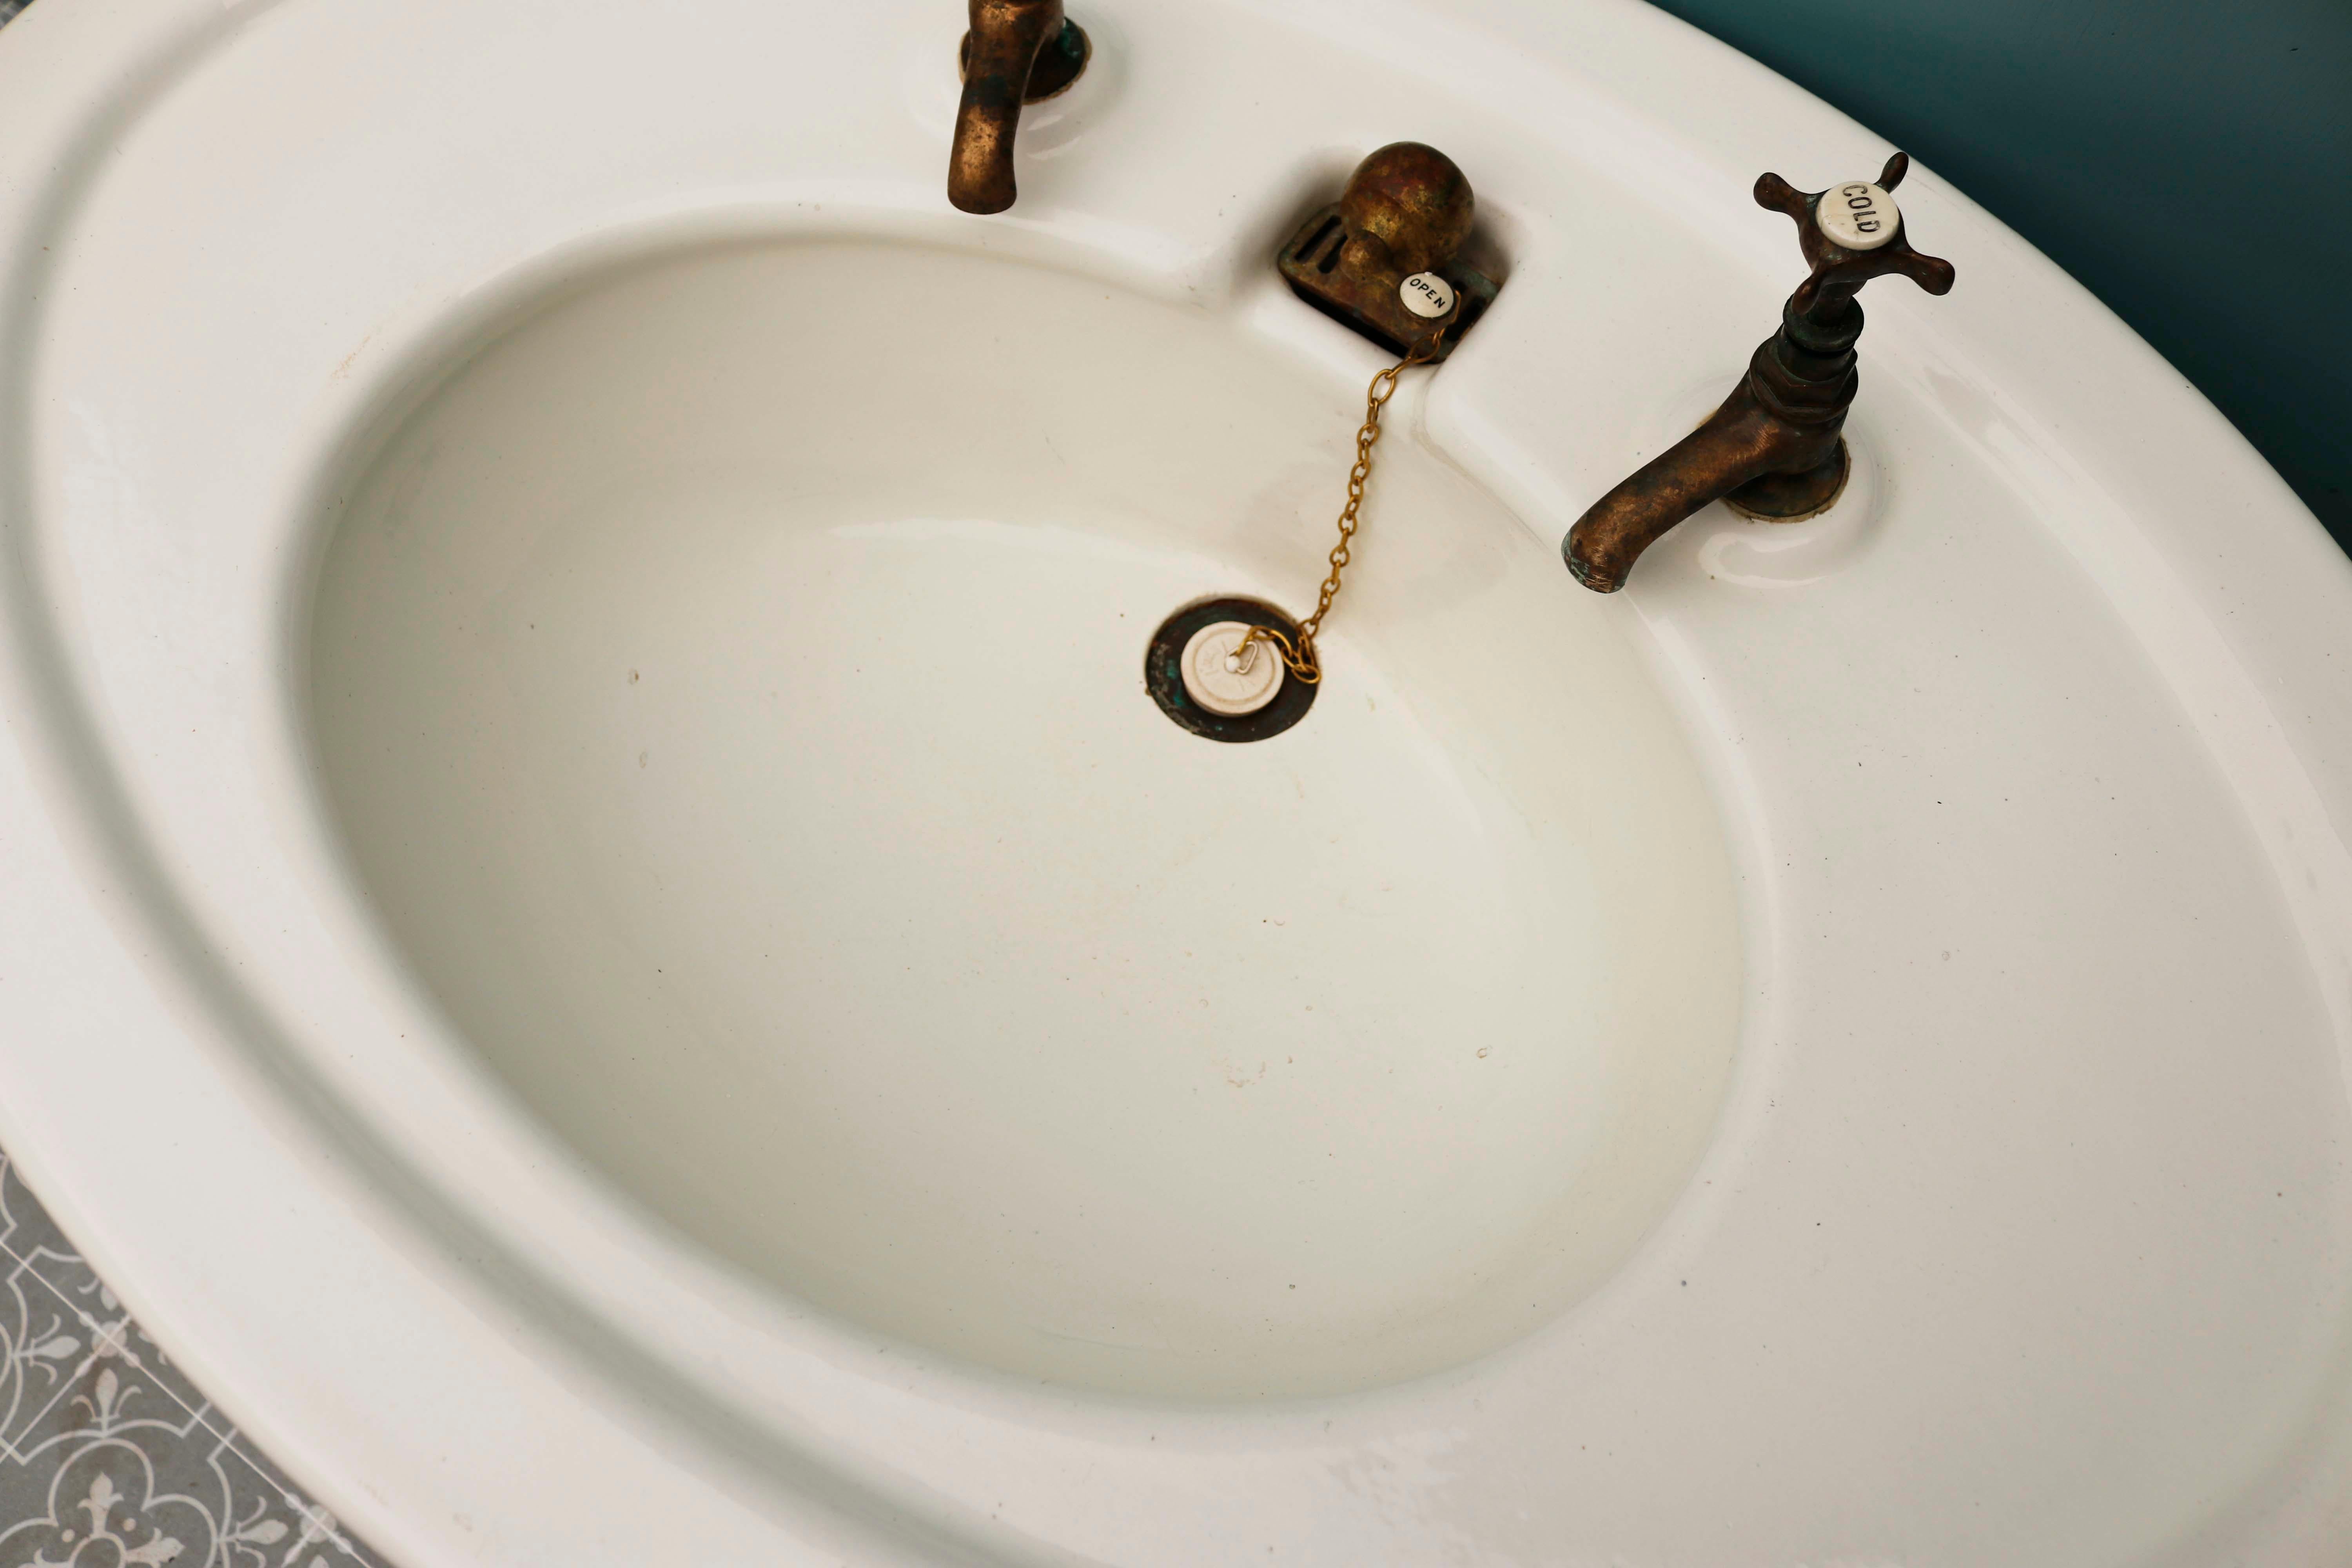 Antique oval shaped pedestal sink. A quaint 1920s stoneware sink which retains its original enamel coating and taps.
 